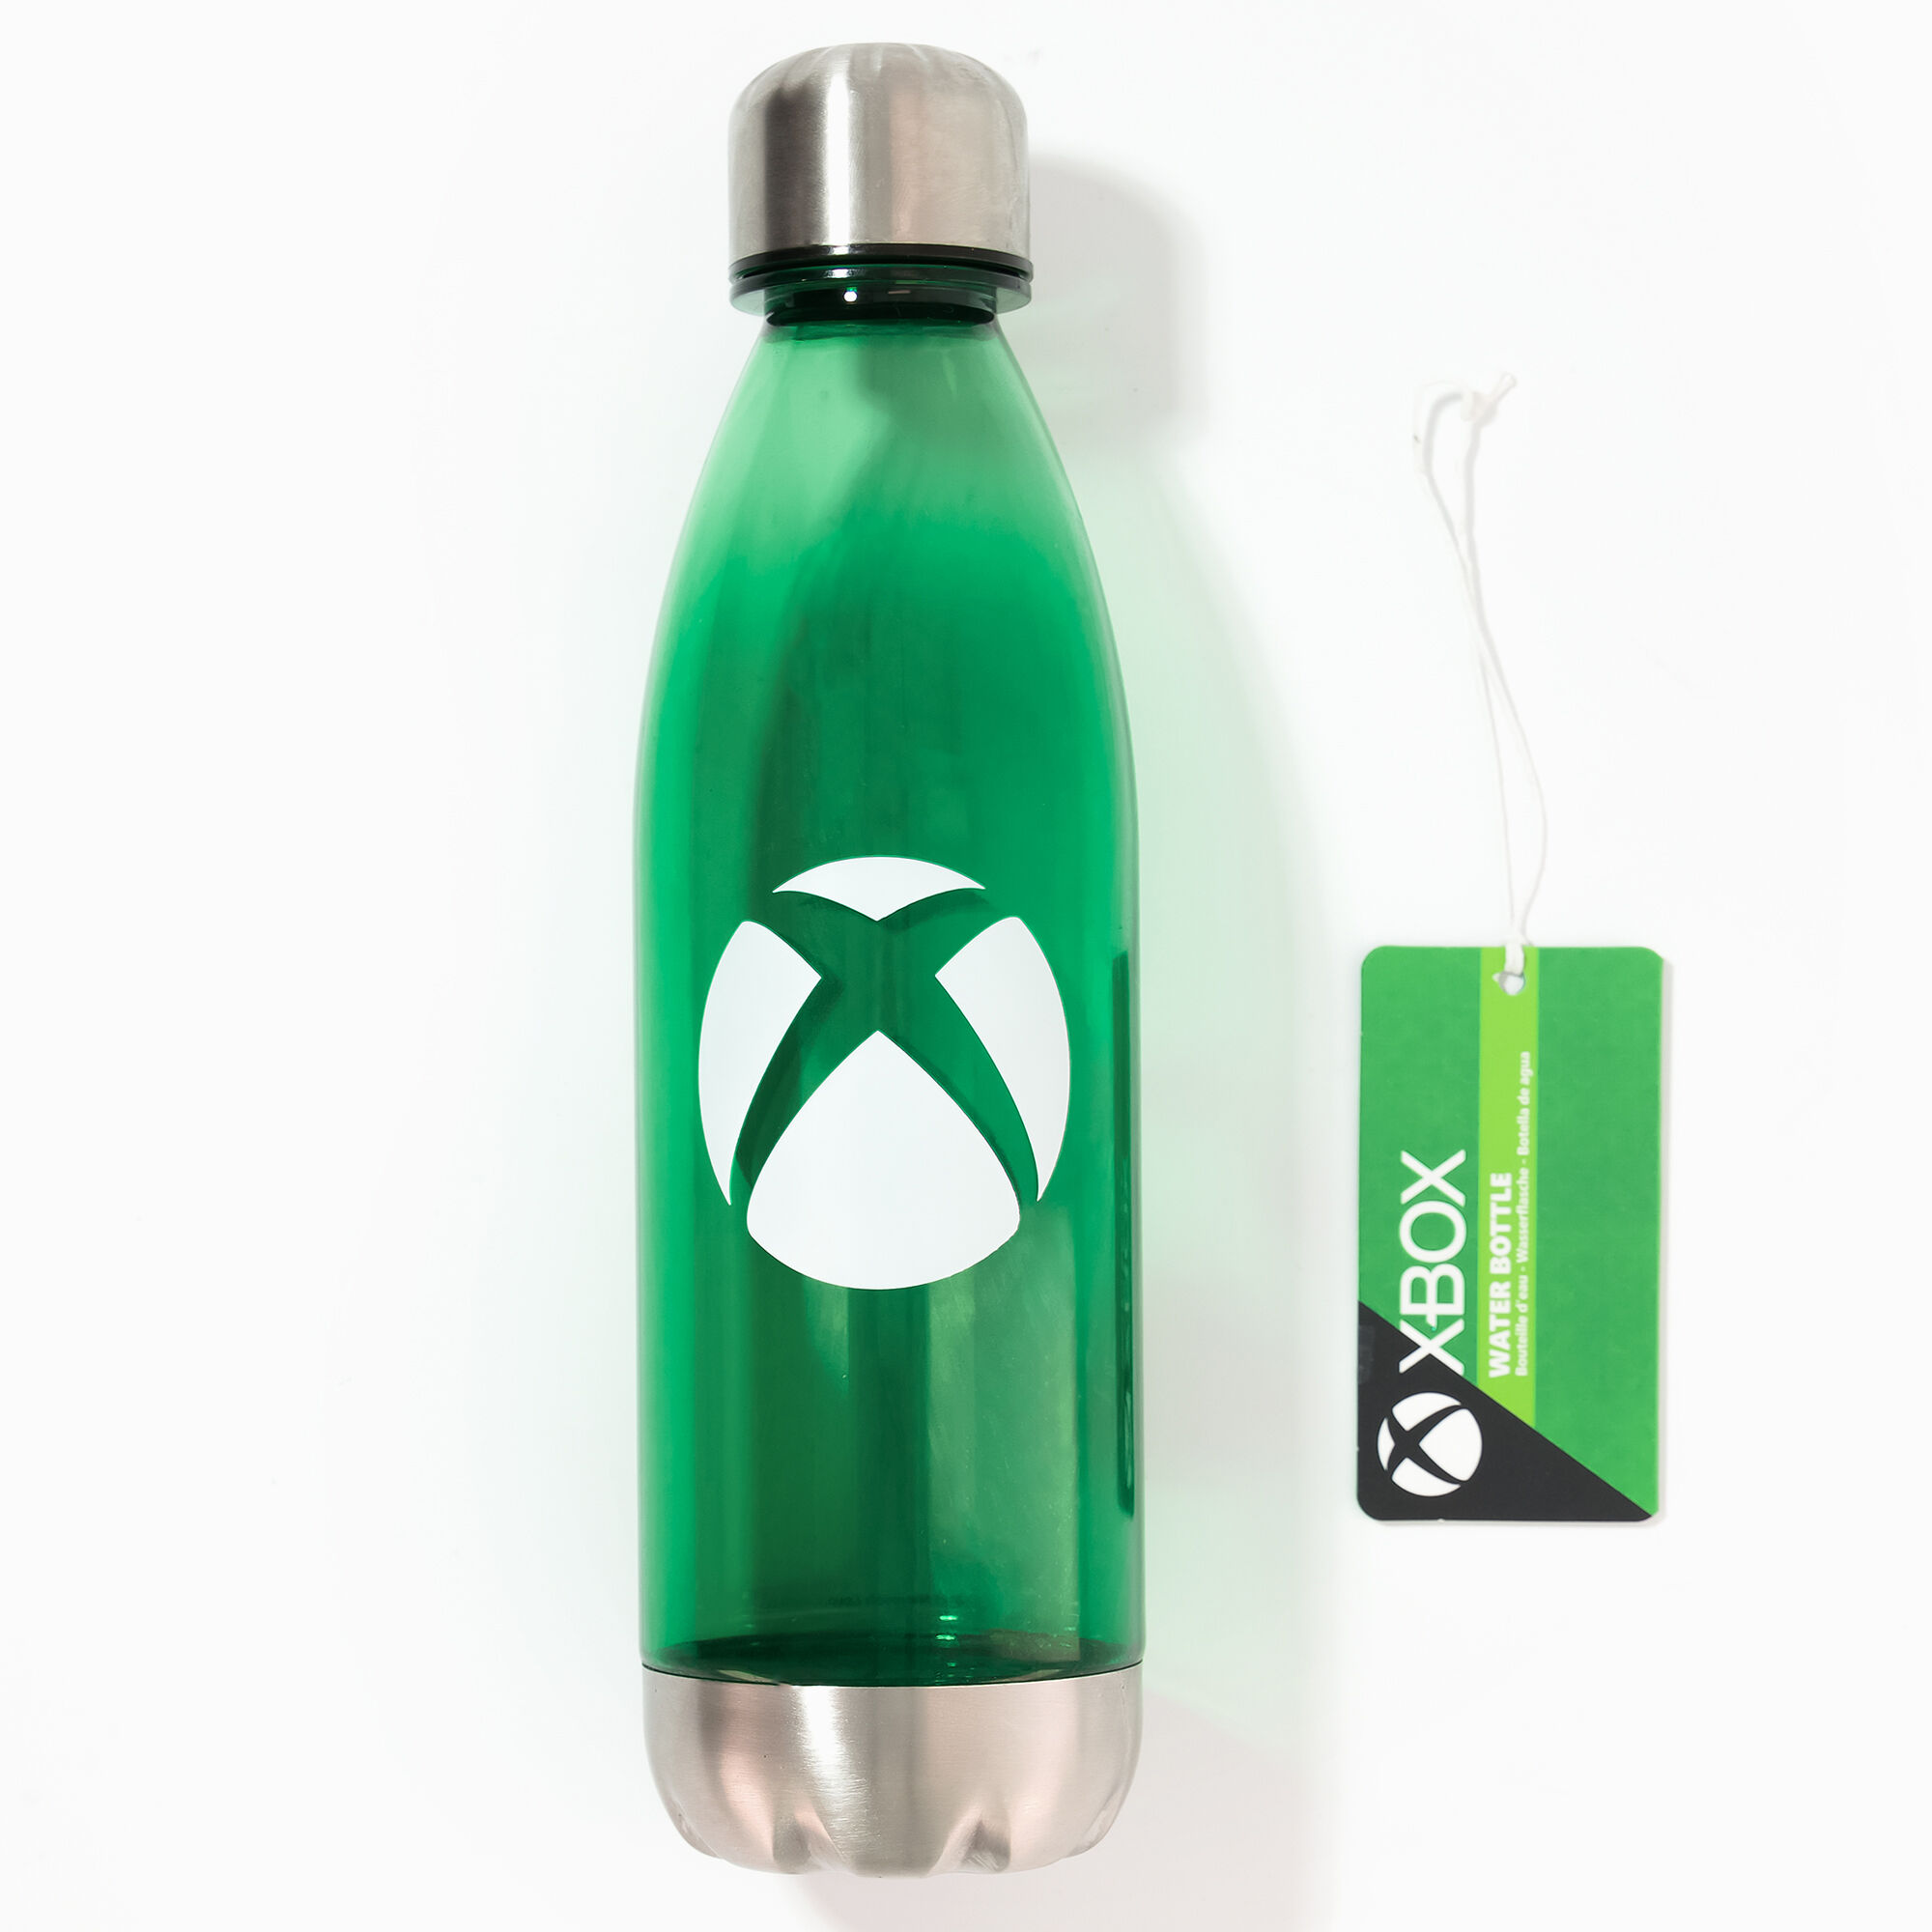 View Claires Xbox Water Bottle Green information